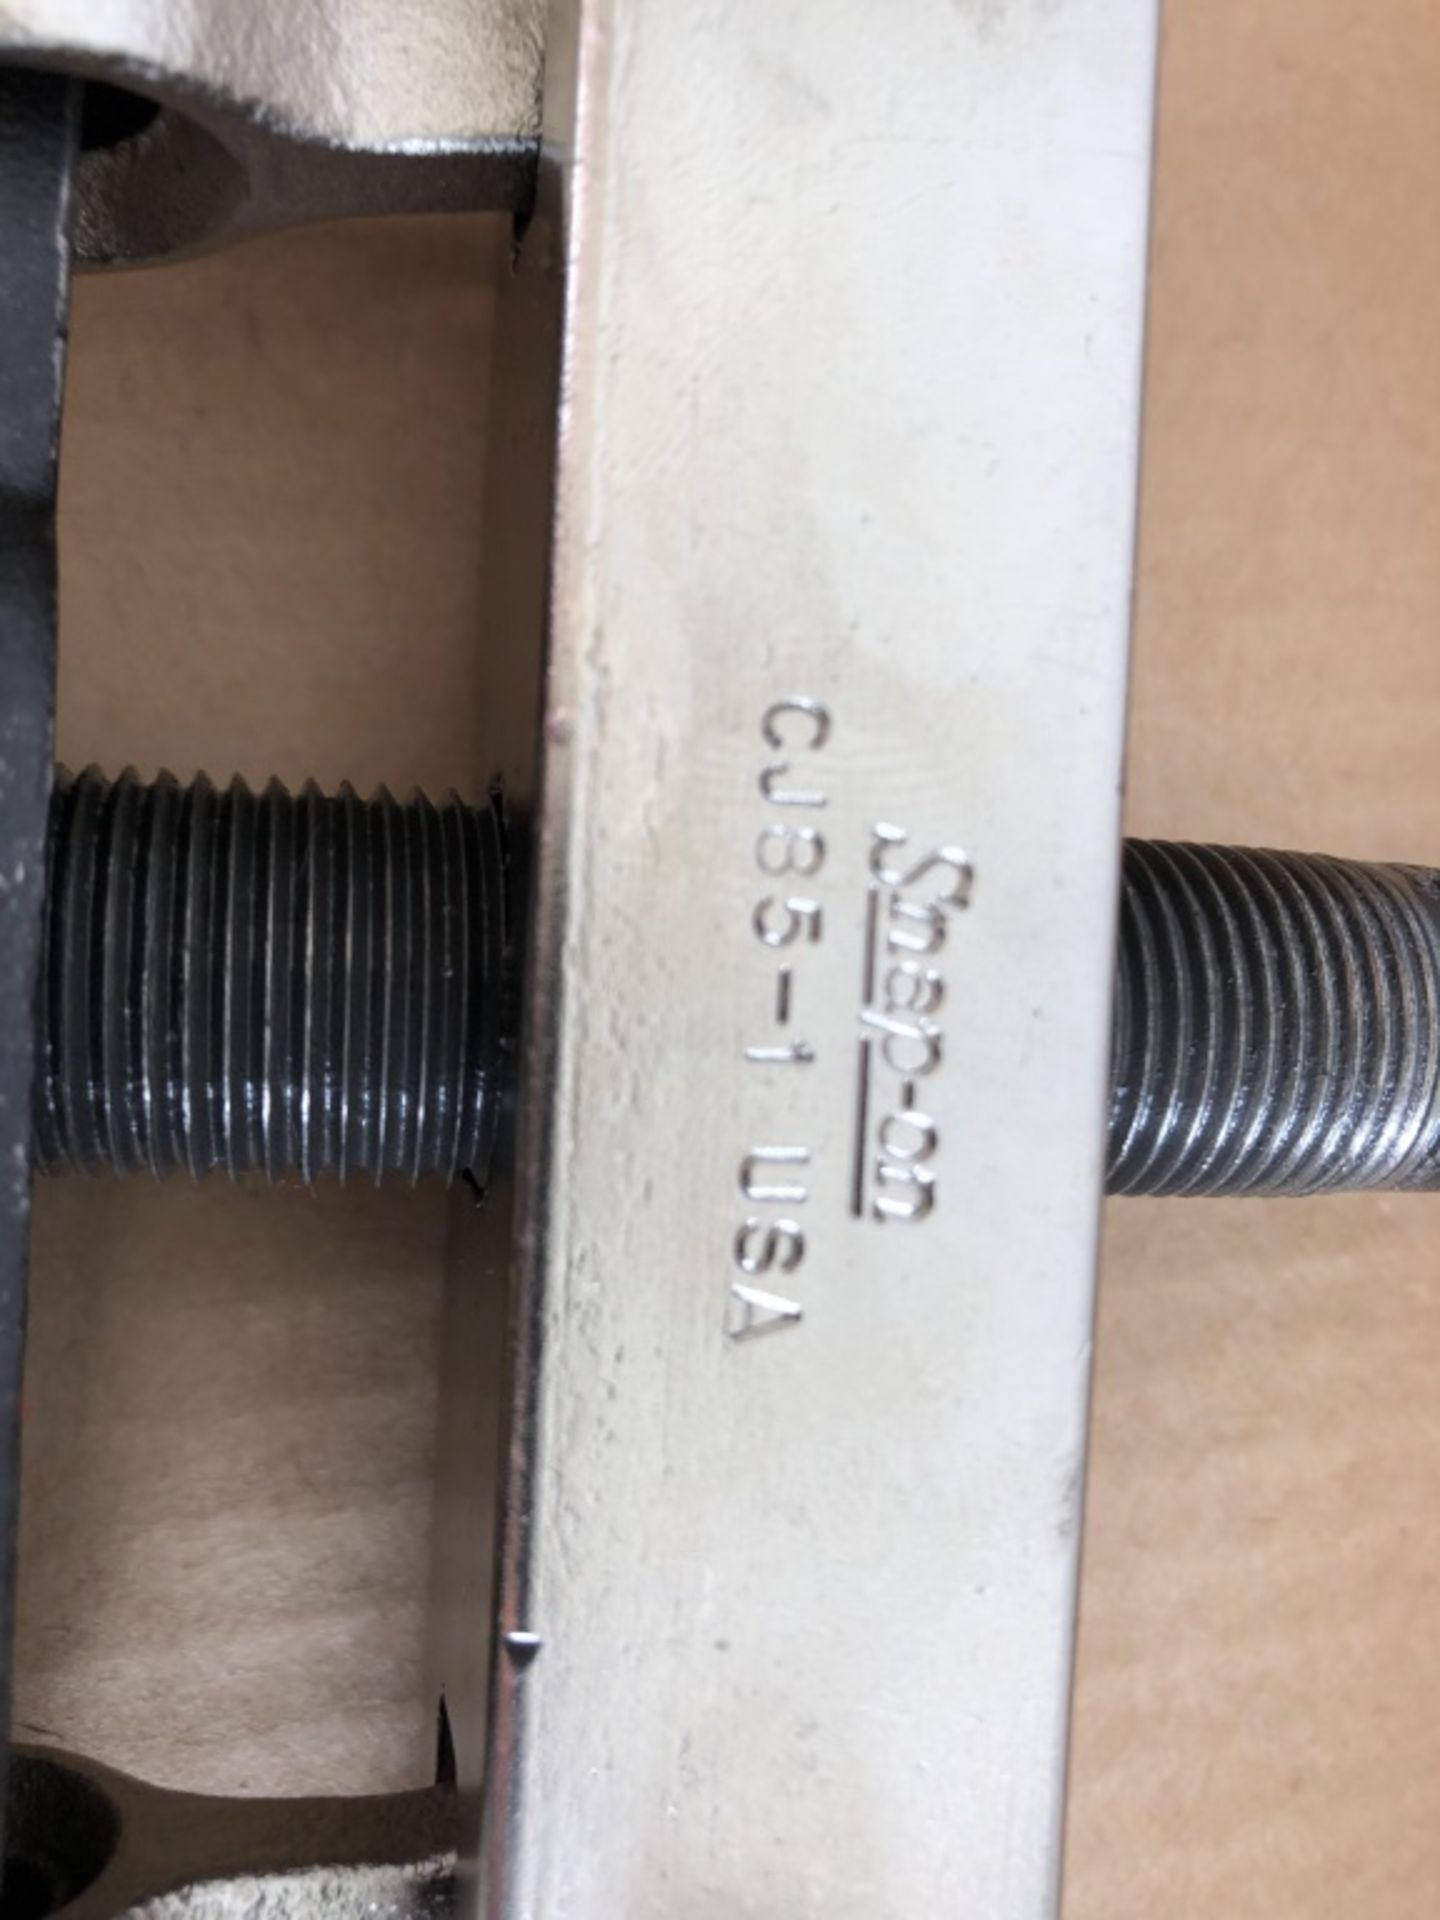 Snap-On Gear Pullers CJ86-1 and CJ282-1 - Image 4 of 4